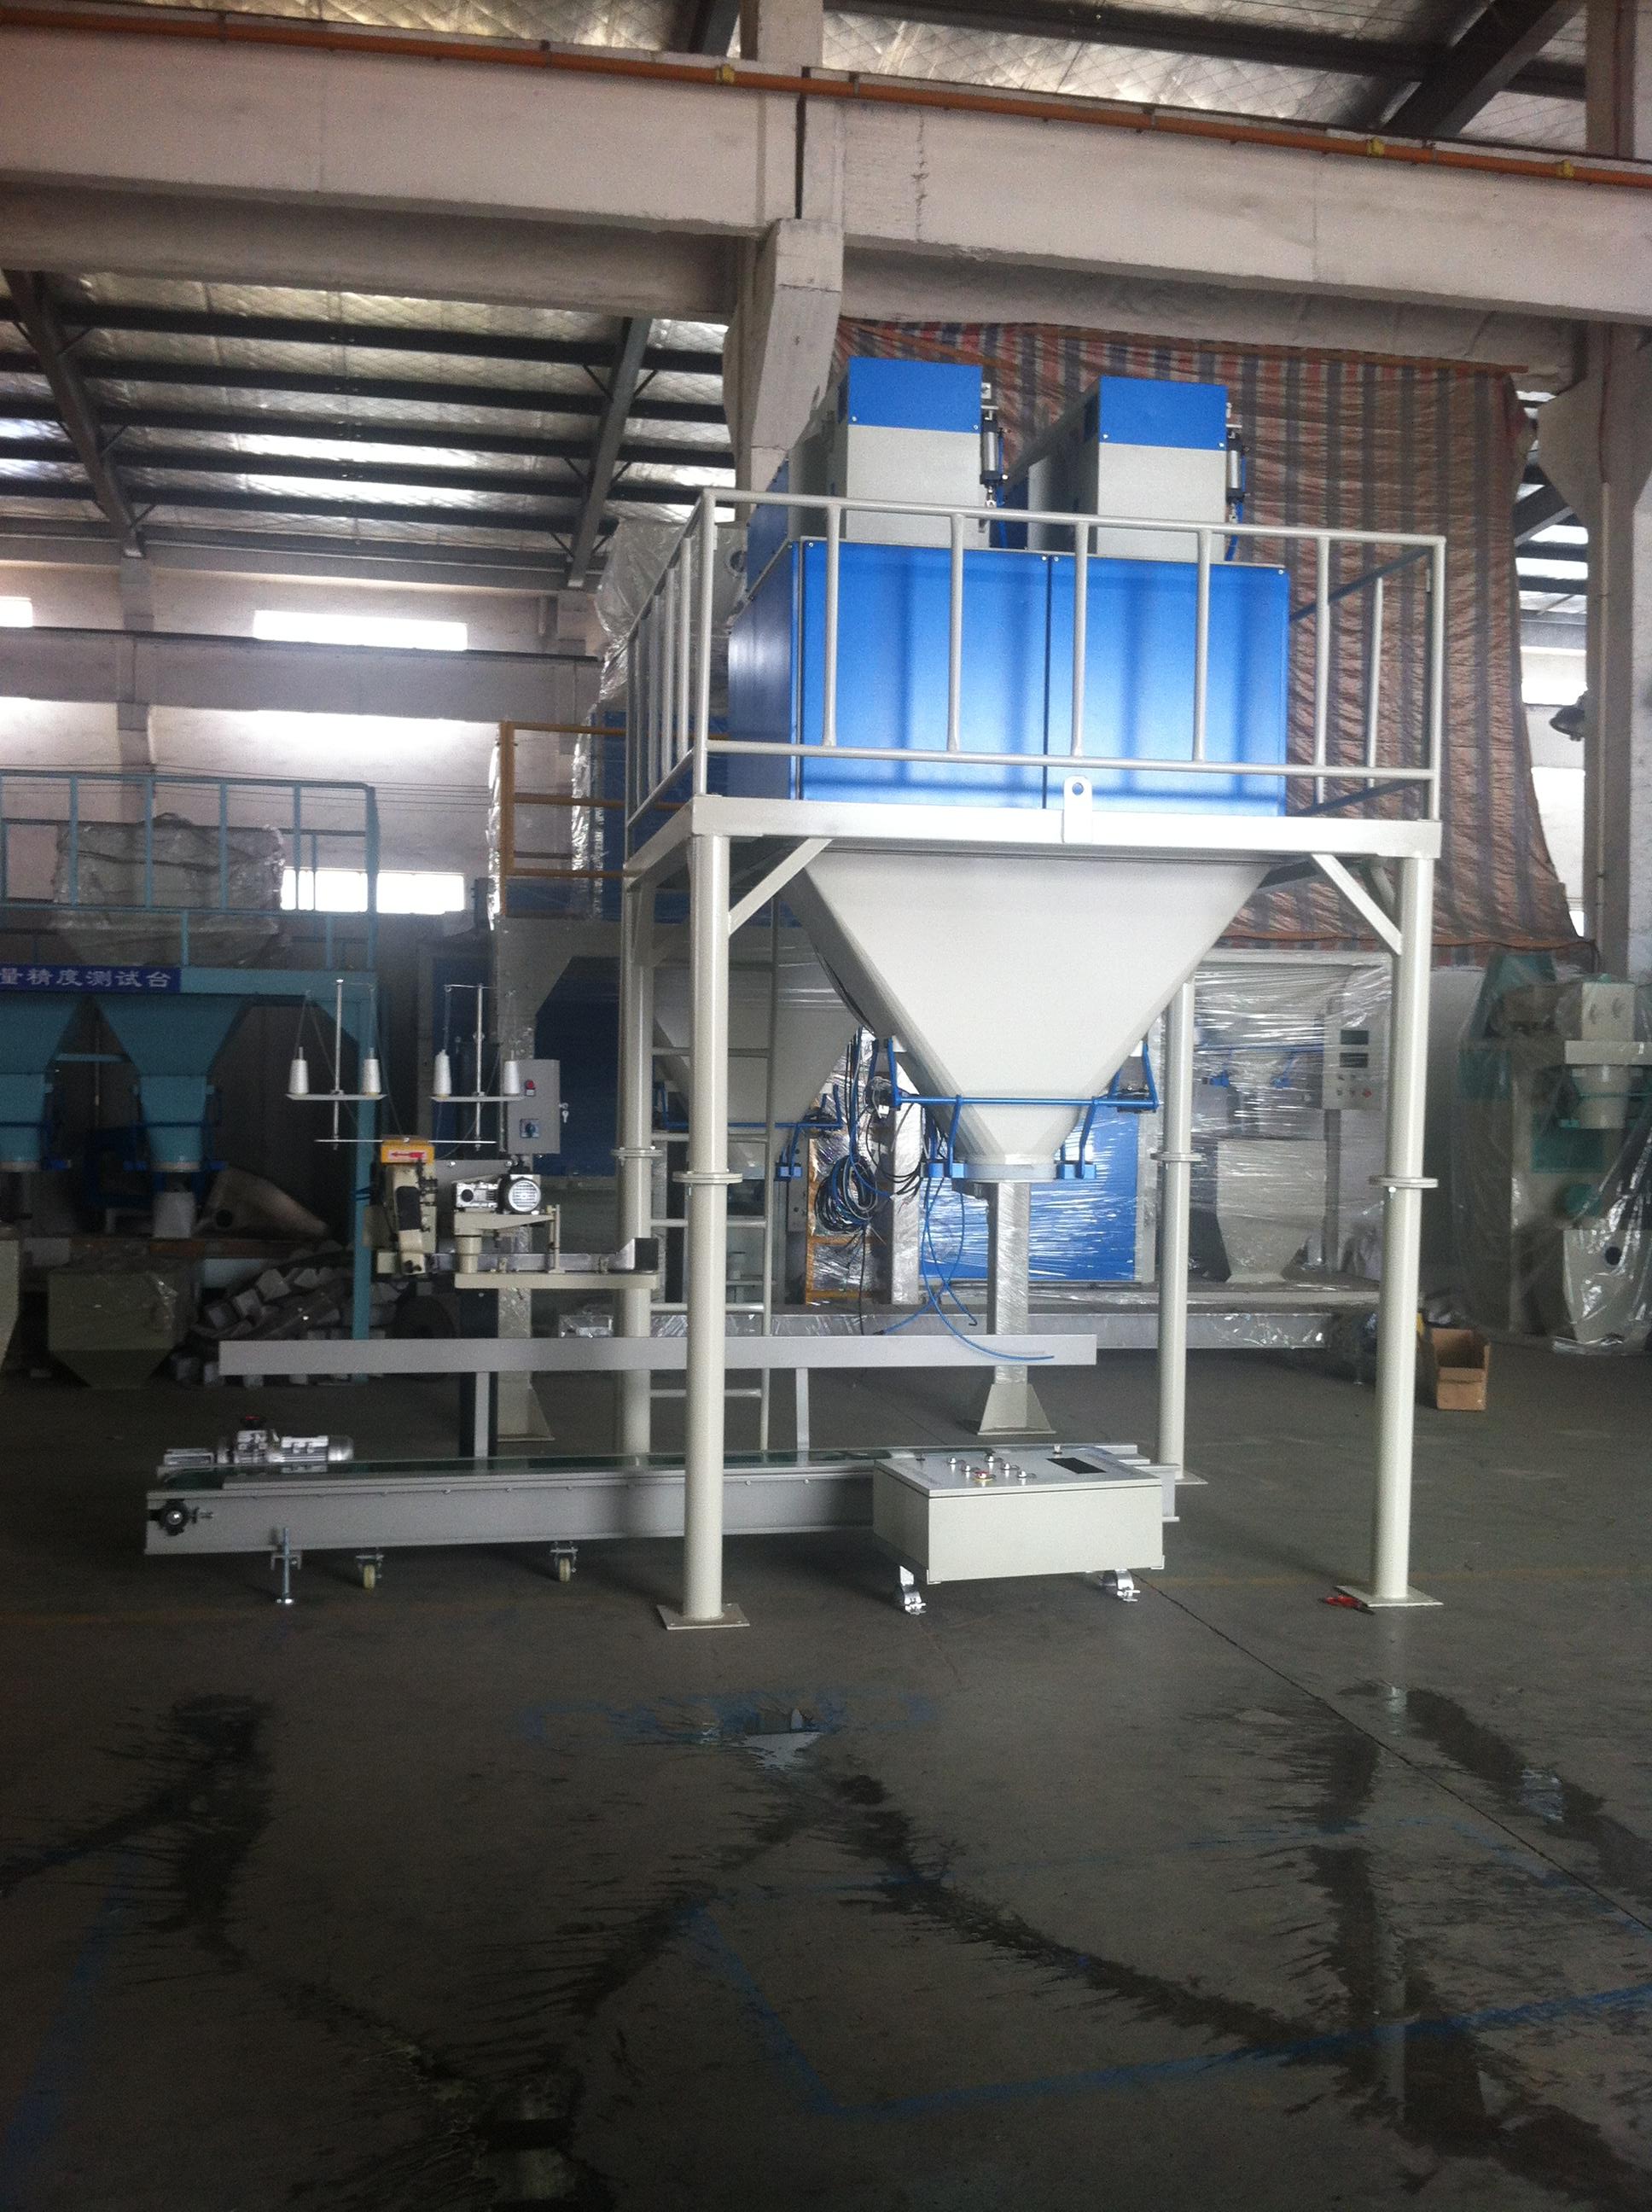 packing machine Rock Phosphate bagging machine fully Automatic Packing Palletizing Line, Fully Automatic Packing Line, Fully Automatic Bagging Line, Fully Automatic filling and packaging line, automat